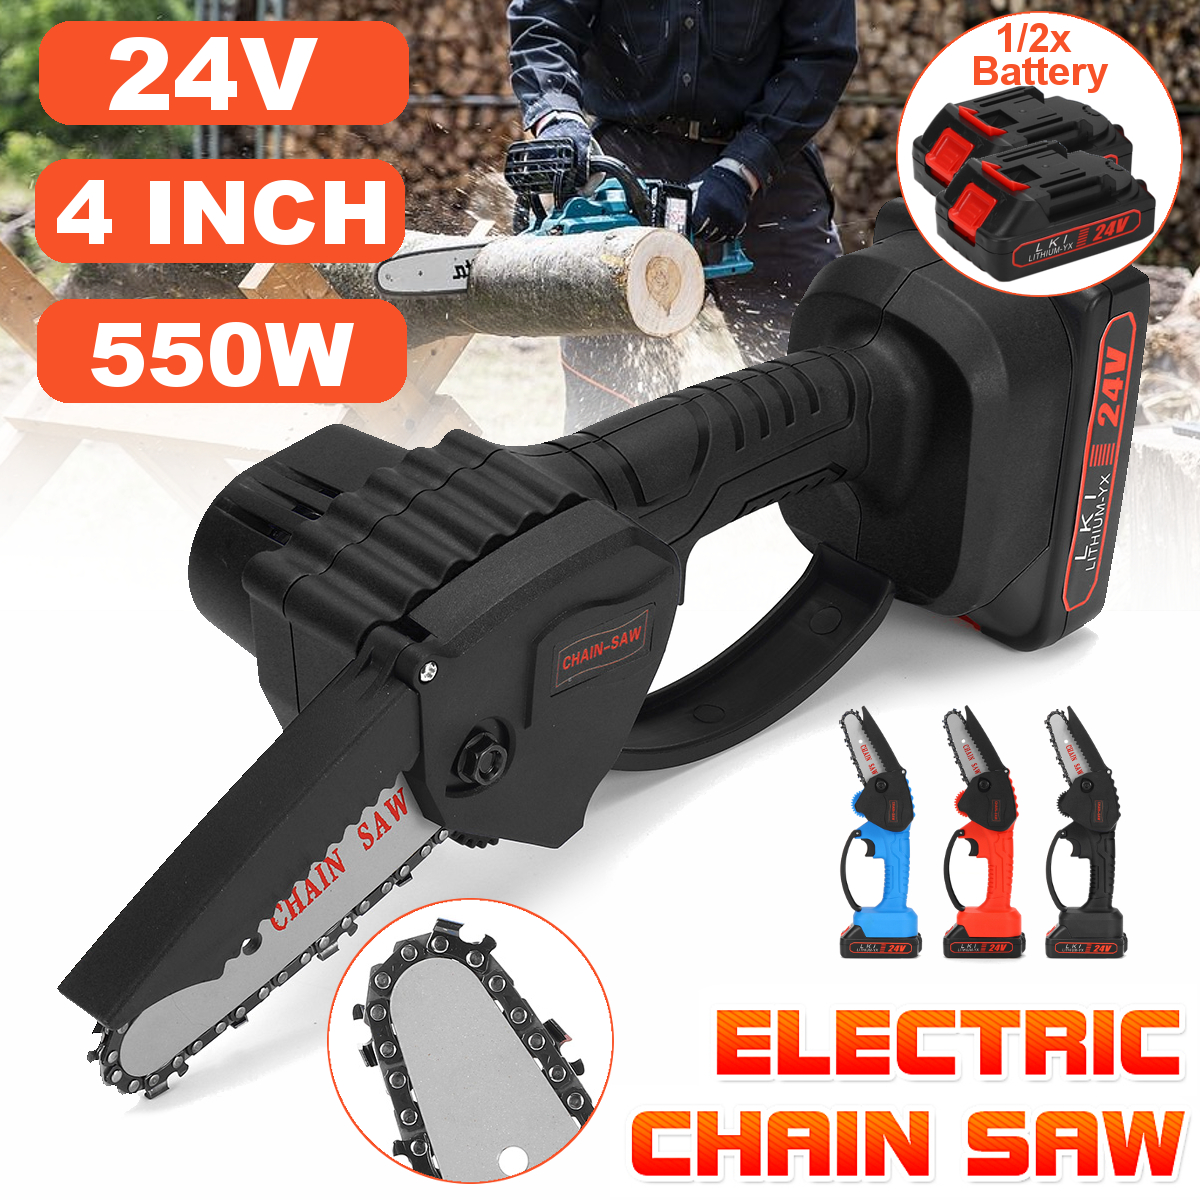 24V-4-Inch-One-Hand-Electric-Chain-Saw-Woodworking-Chainsaw-550W-Cordless-Wood-Saws-Cutter-W-1-or-2--1797421-1